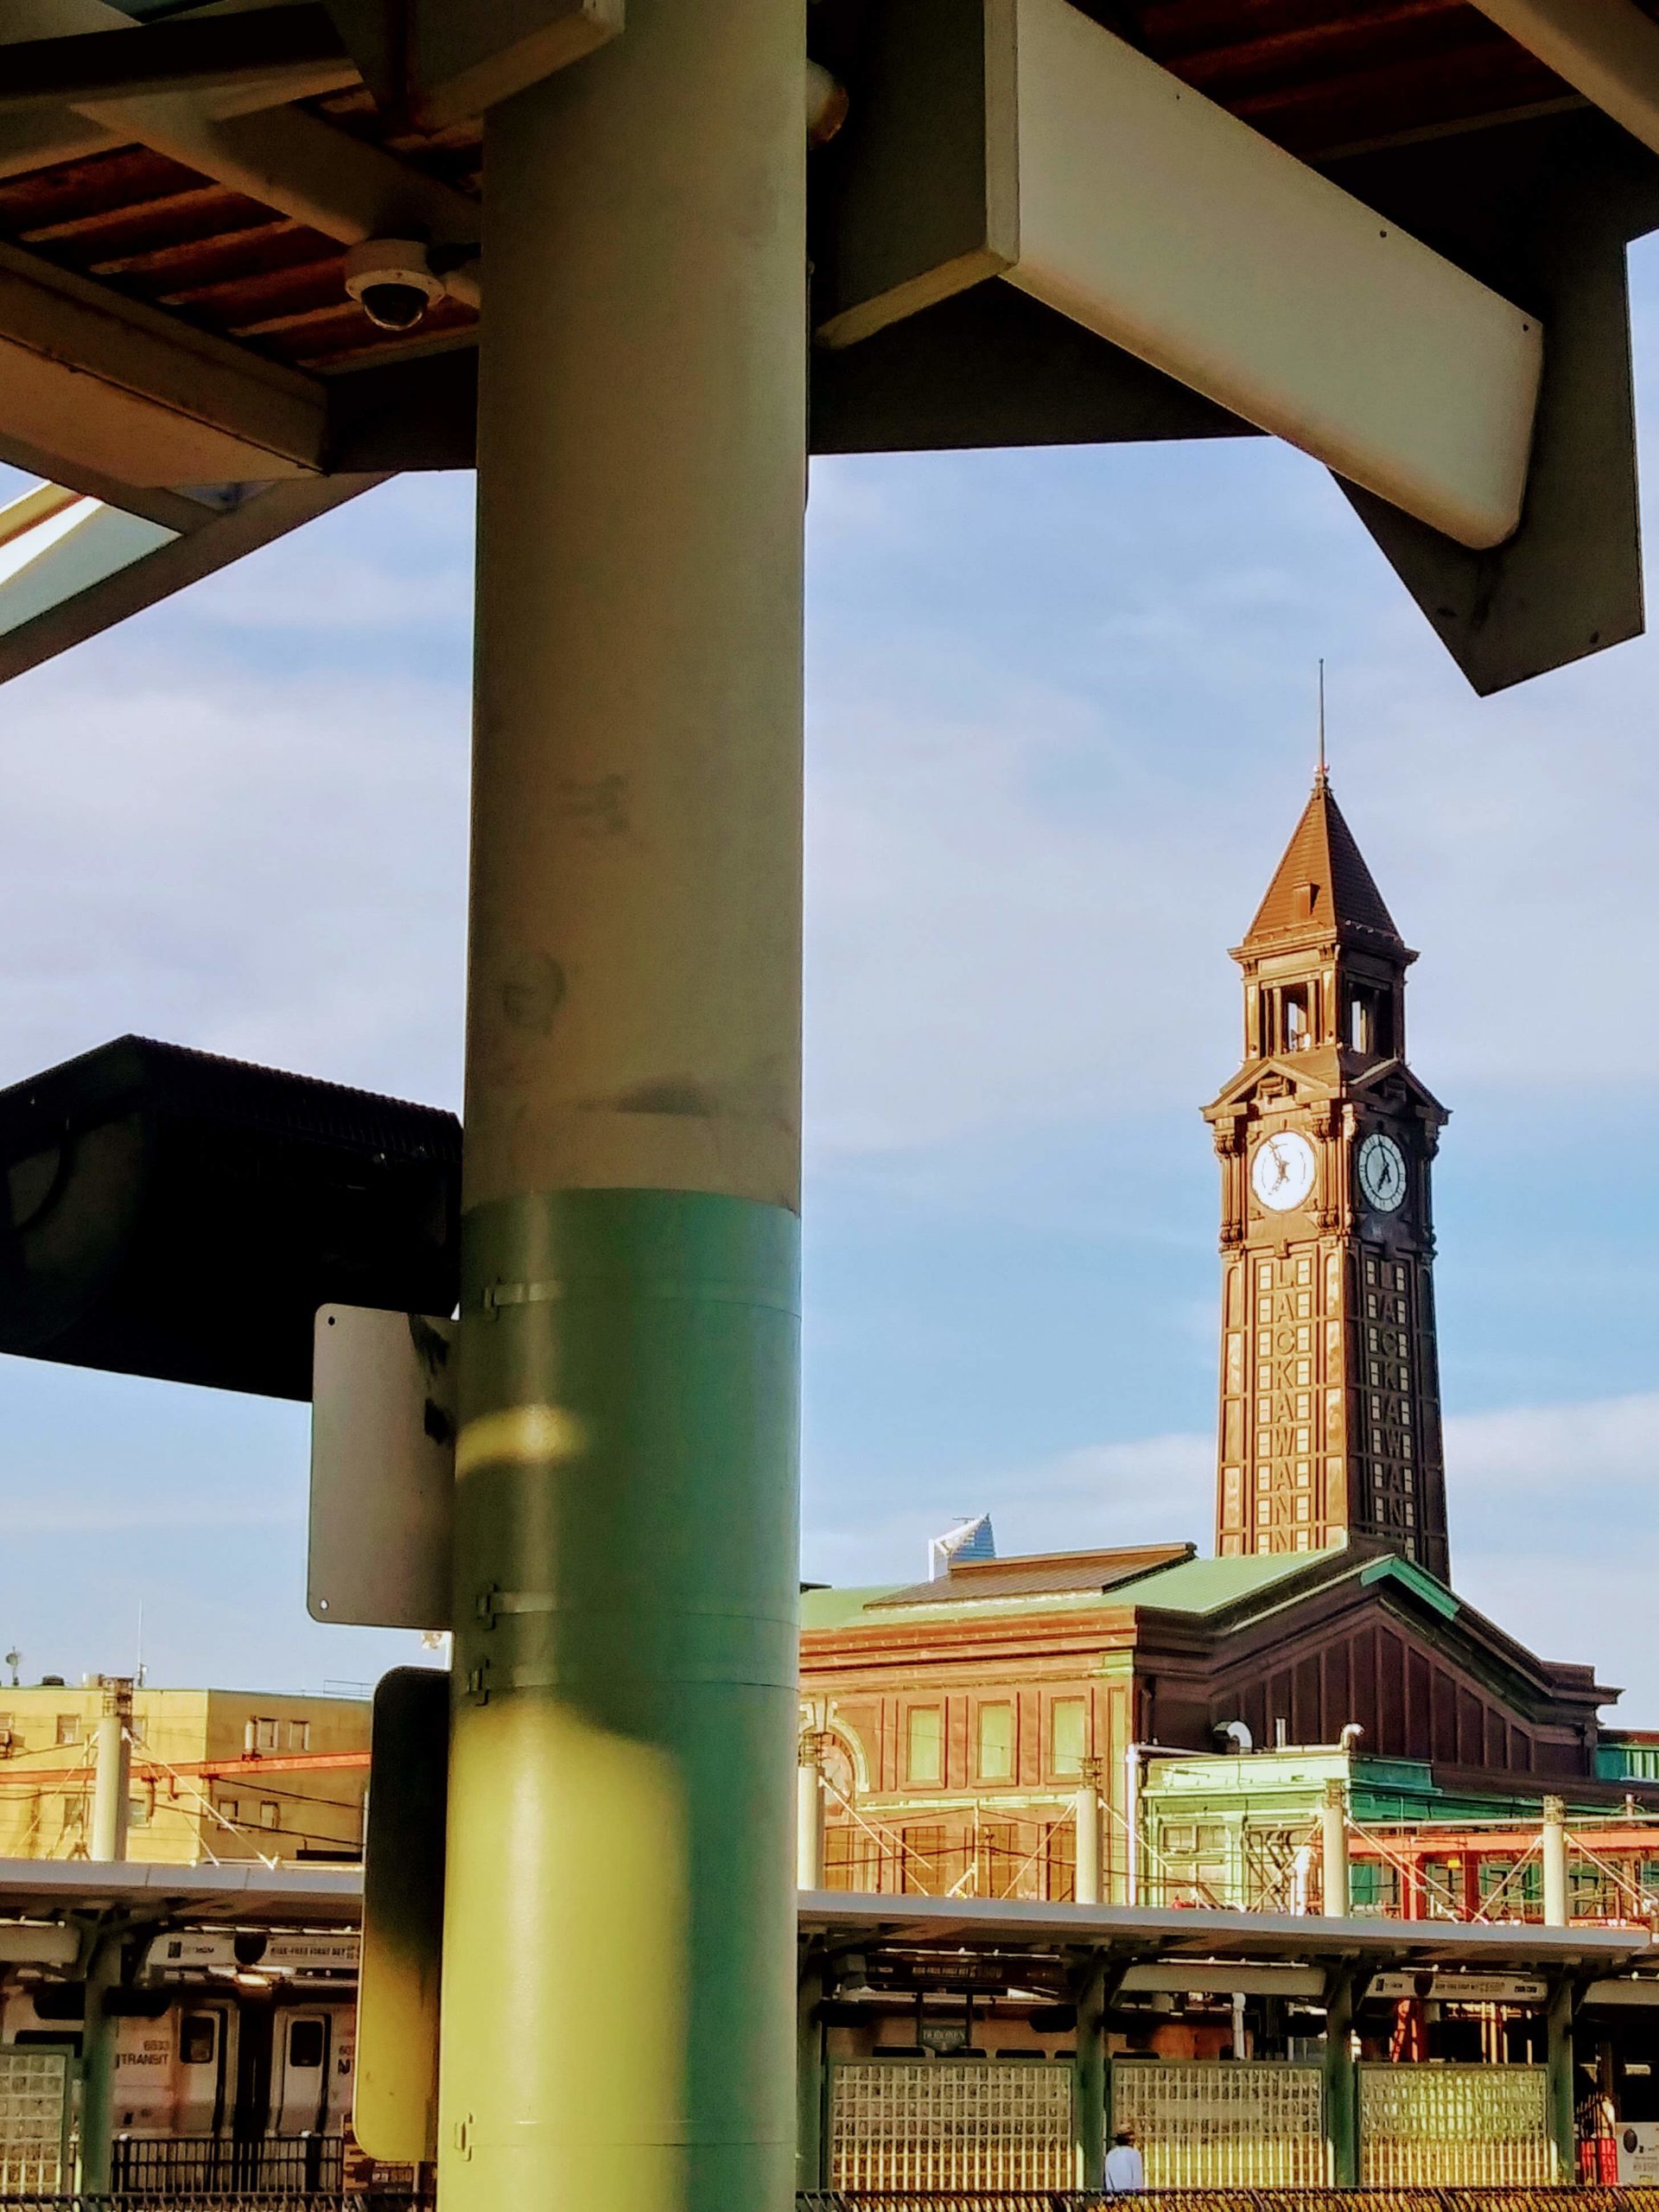 Clock tower and architecture in Hoboken, New Jersey